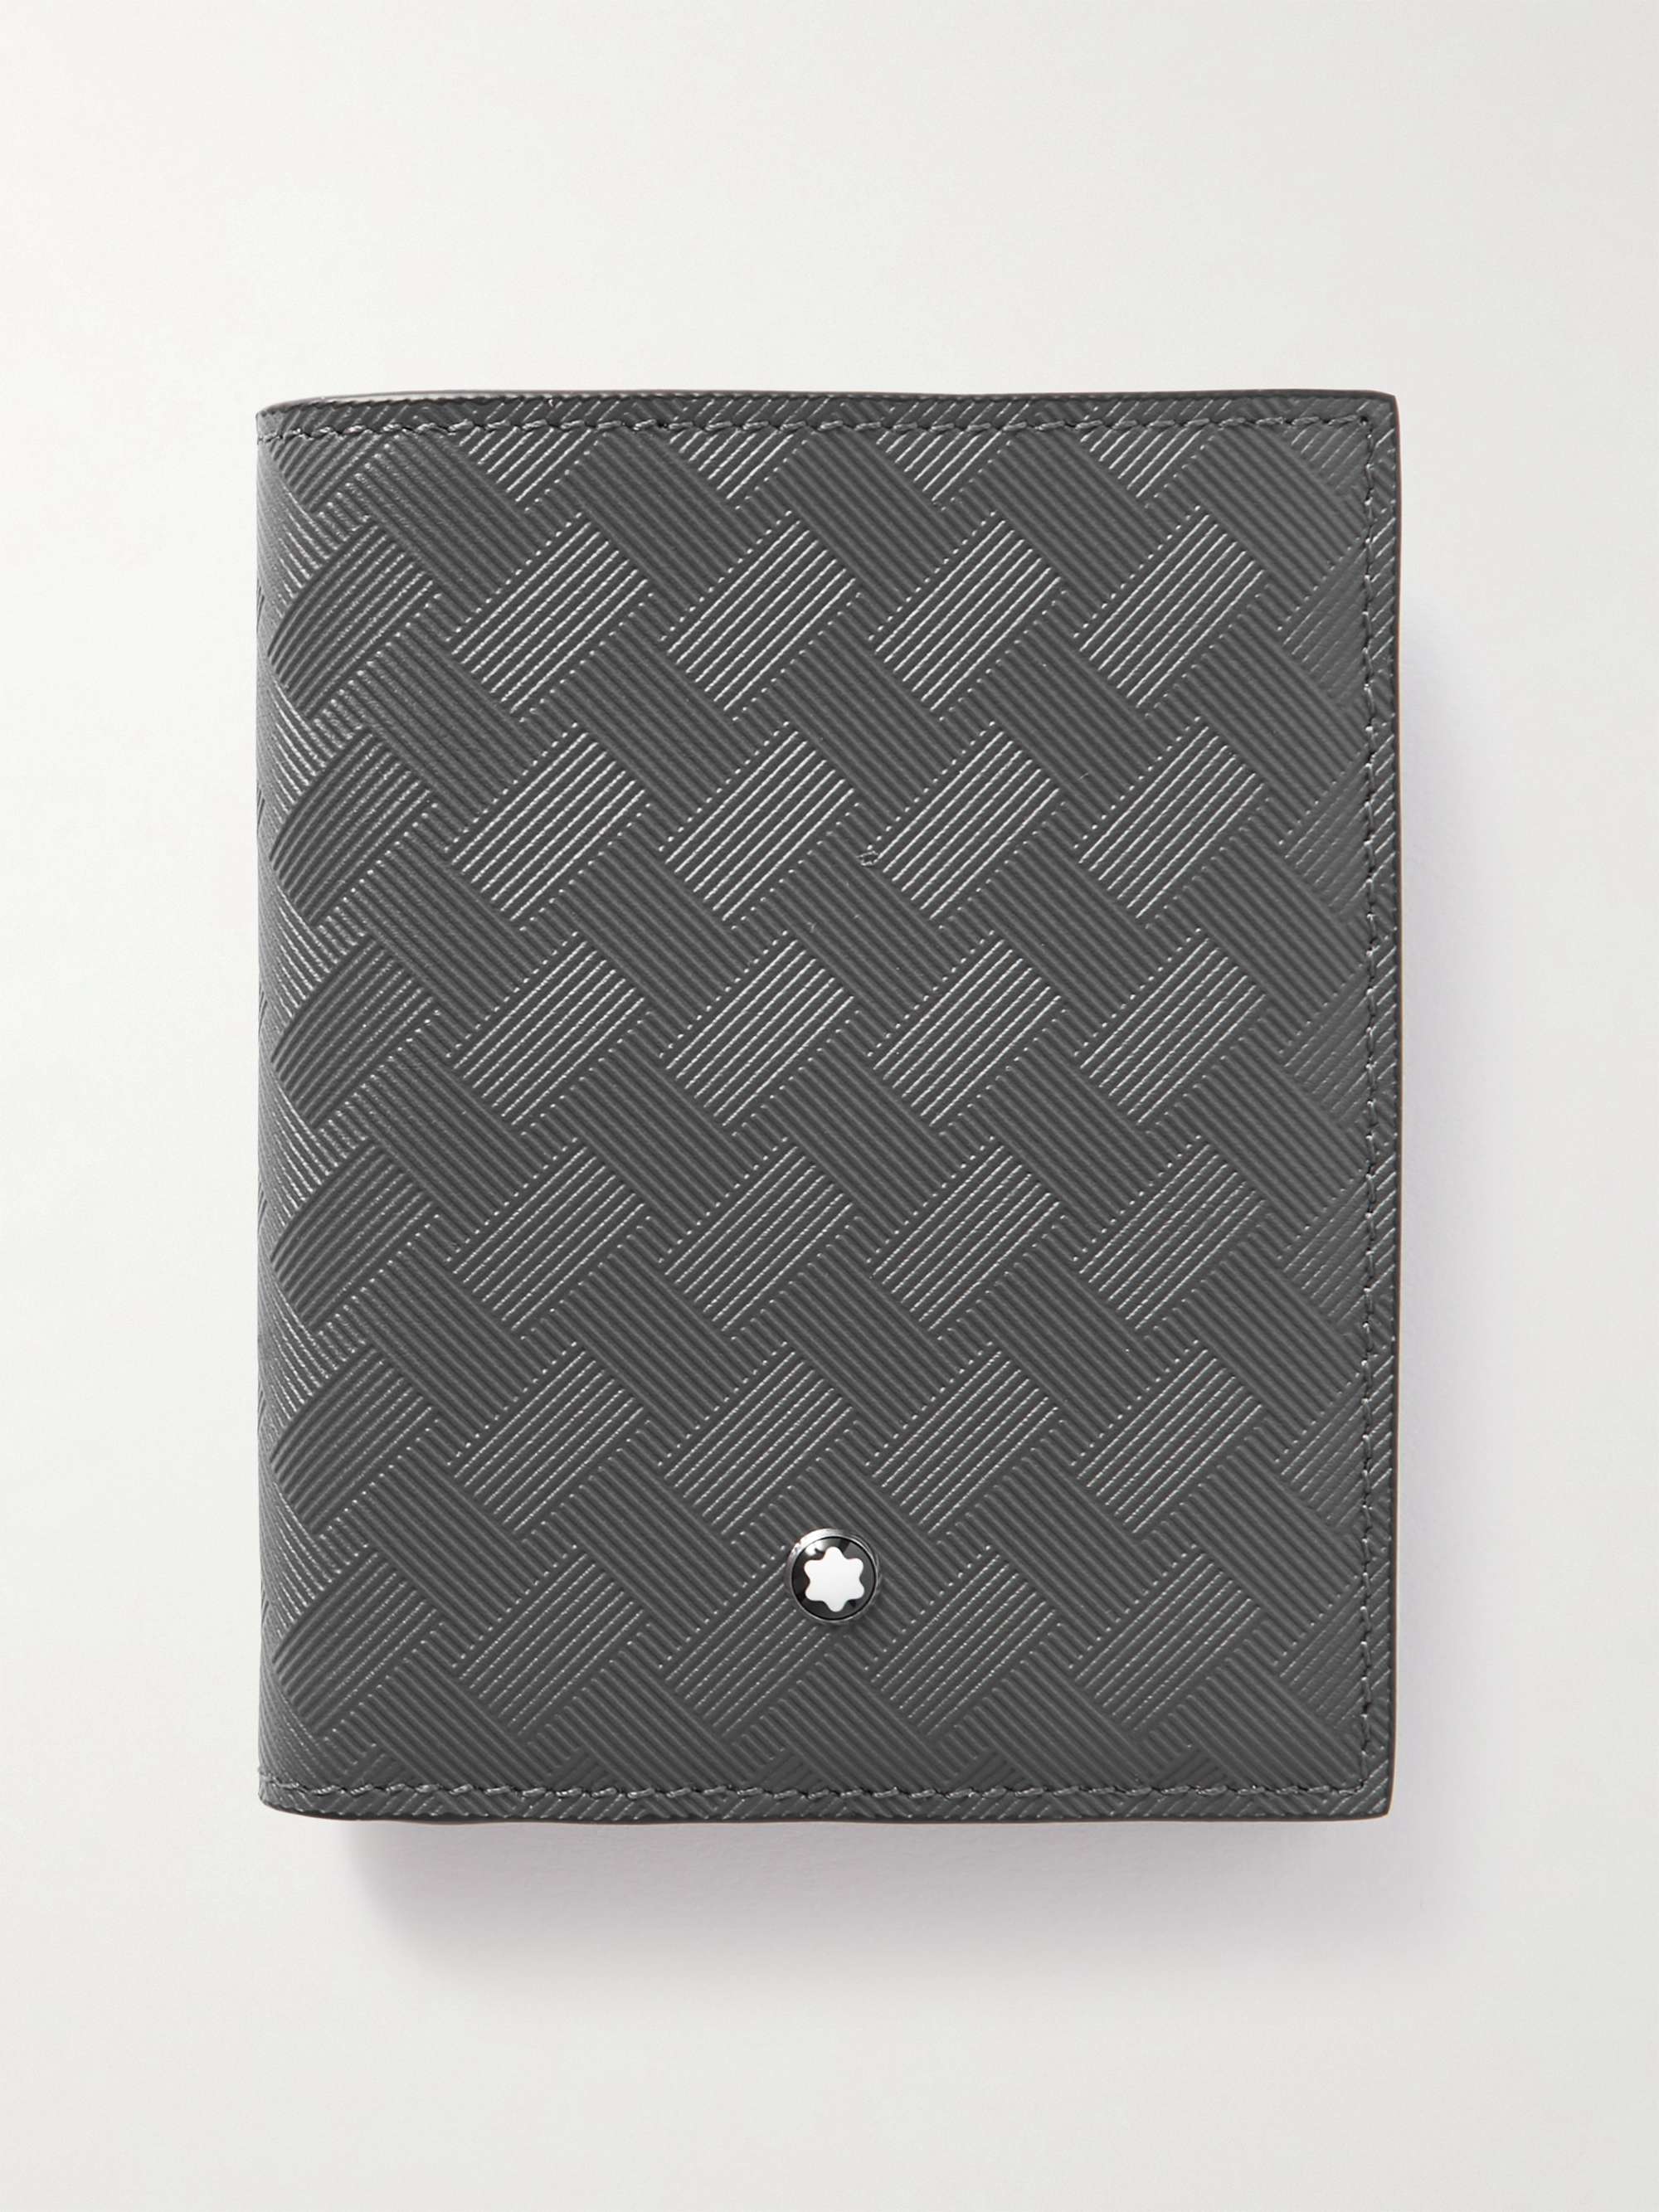 MONTBLANC Extreme 3.0 Cross-Grain Leather Billfold Wallet